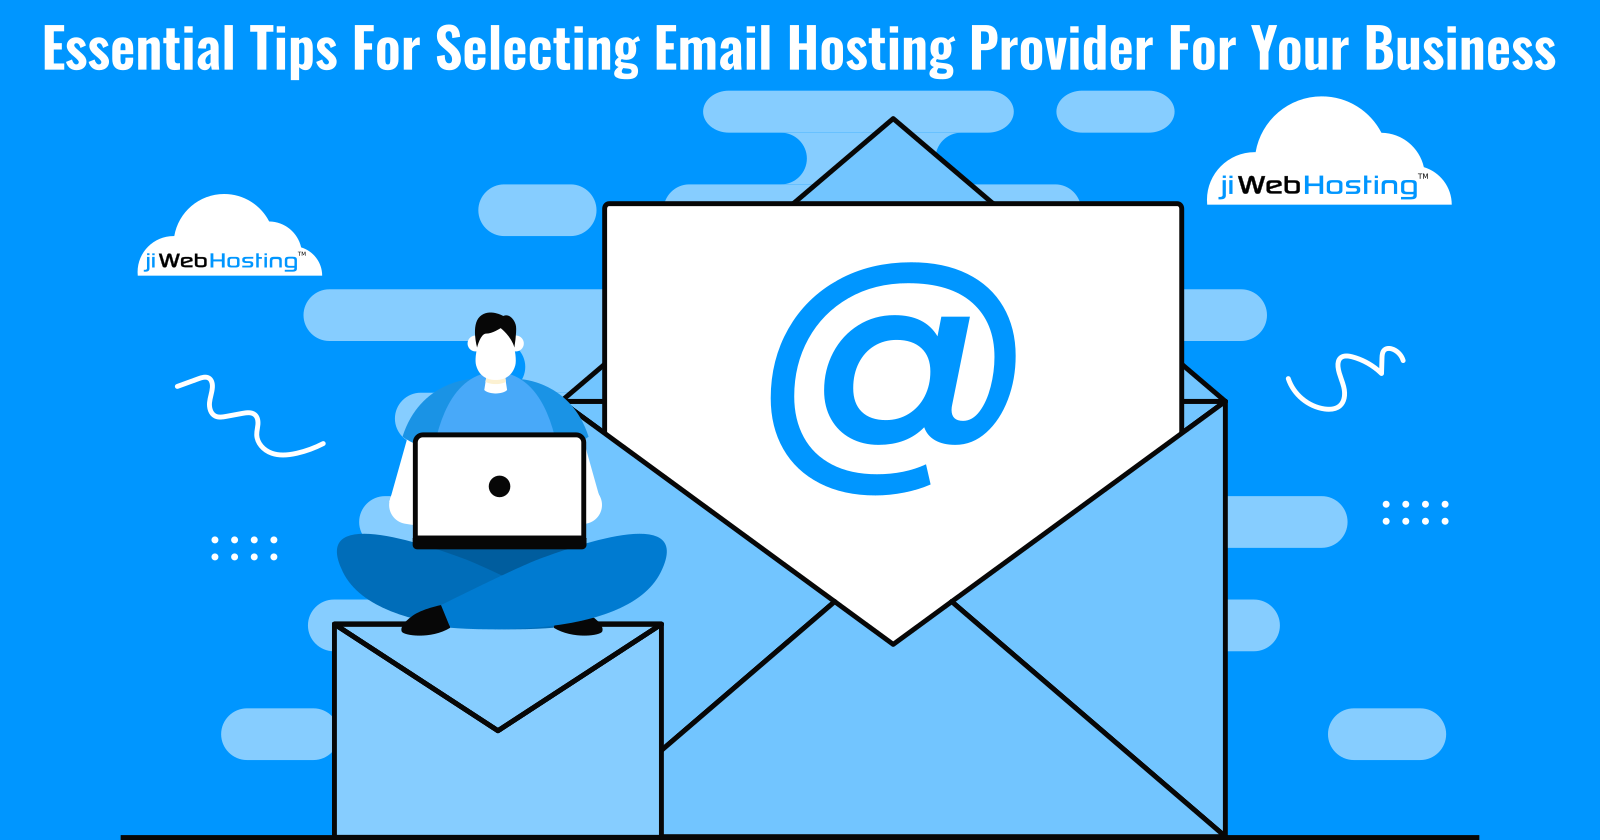 Essential Tips For Selecting Email Hosting Provider For Your Business